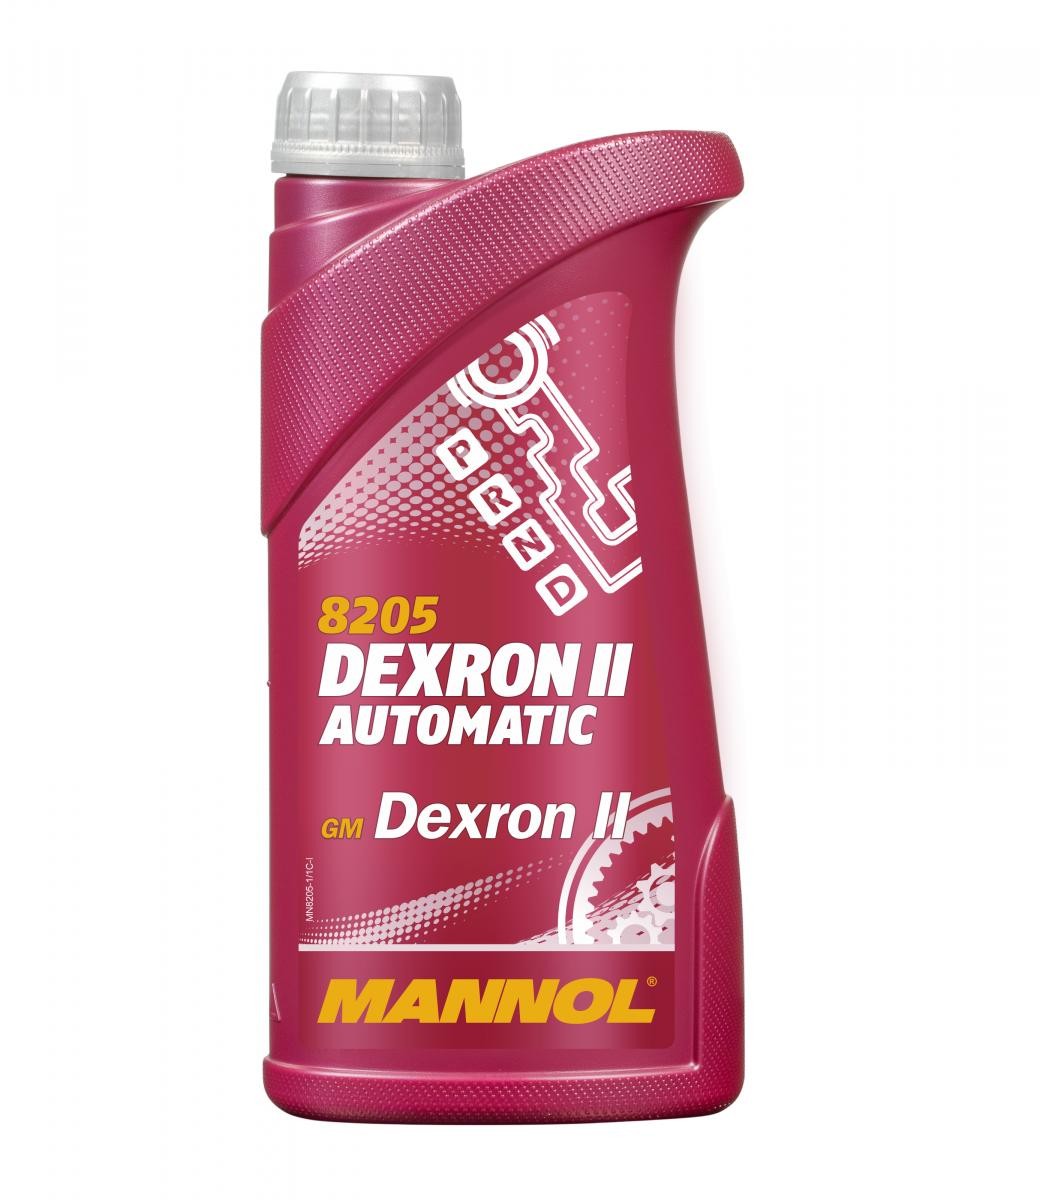 Toyota Automatic transmission fluid MANNOL MN8205-1 at a good price